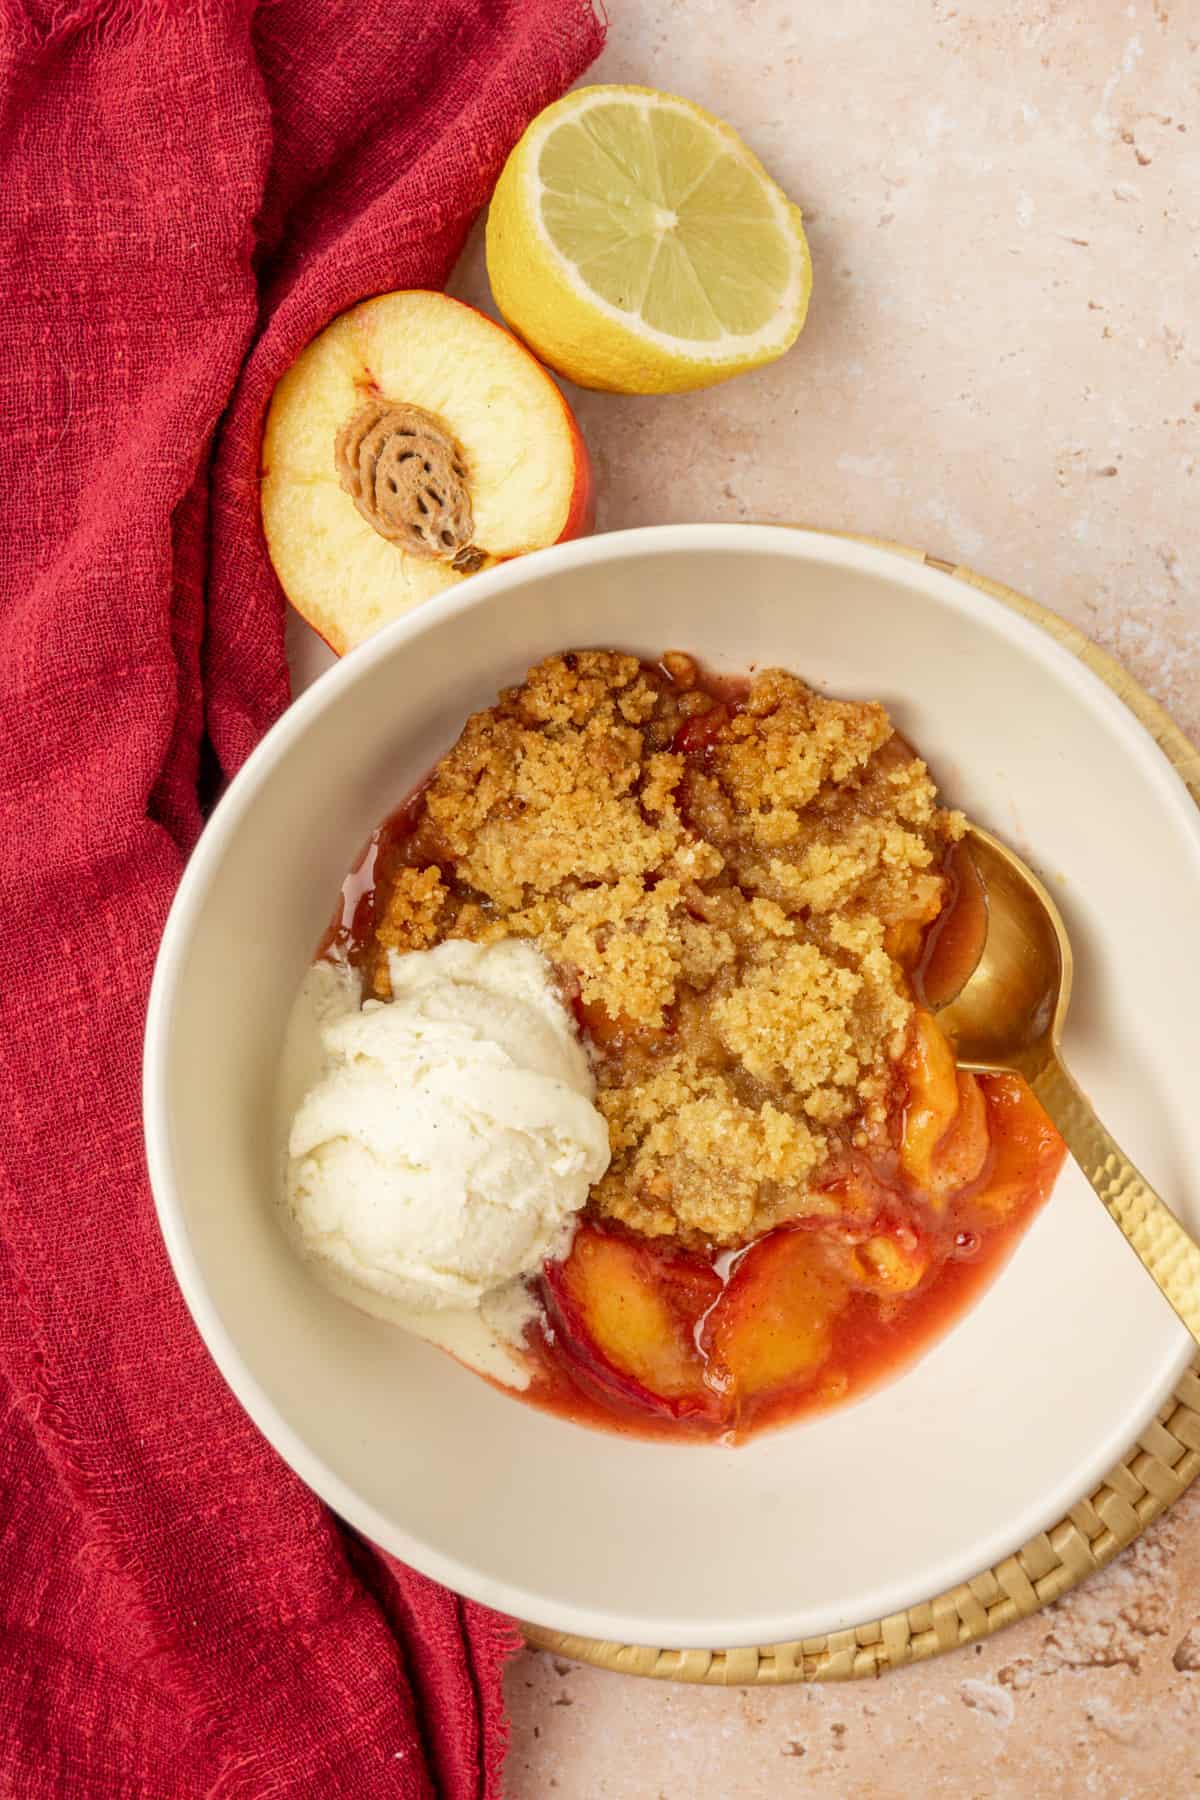 Nectarine crumble topped with vegan vanilla ice cream in a bowl.